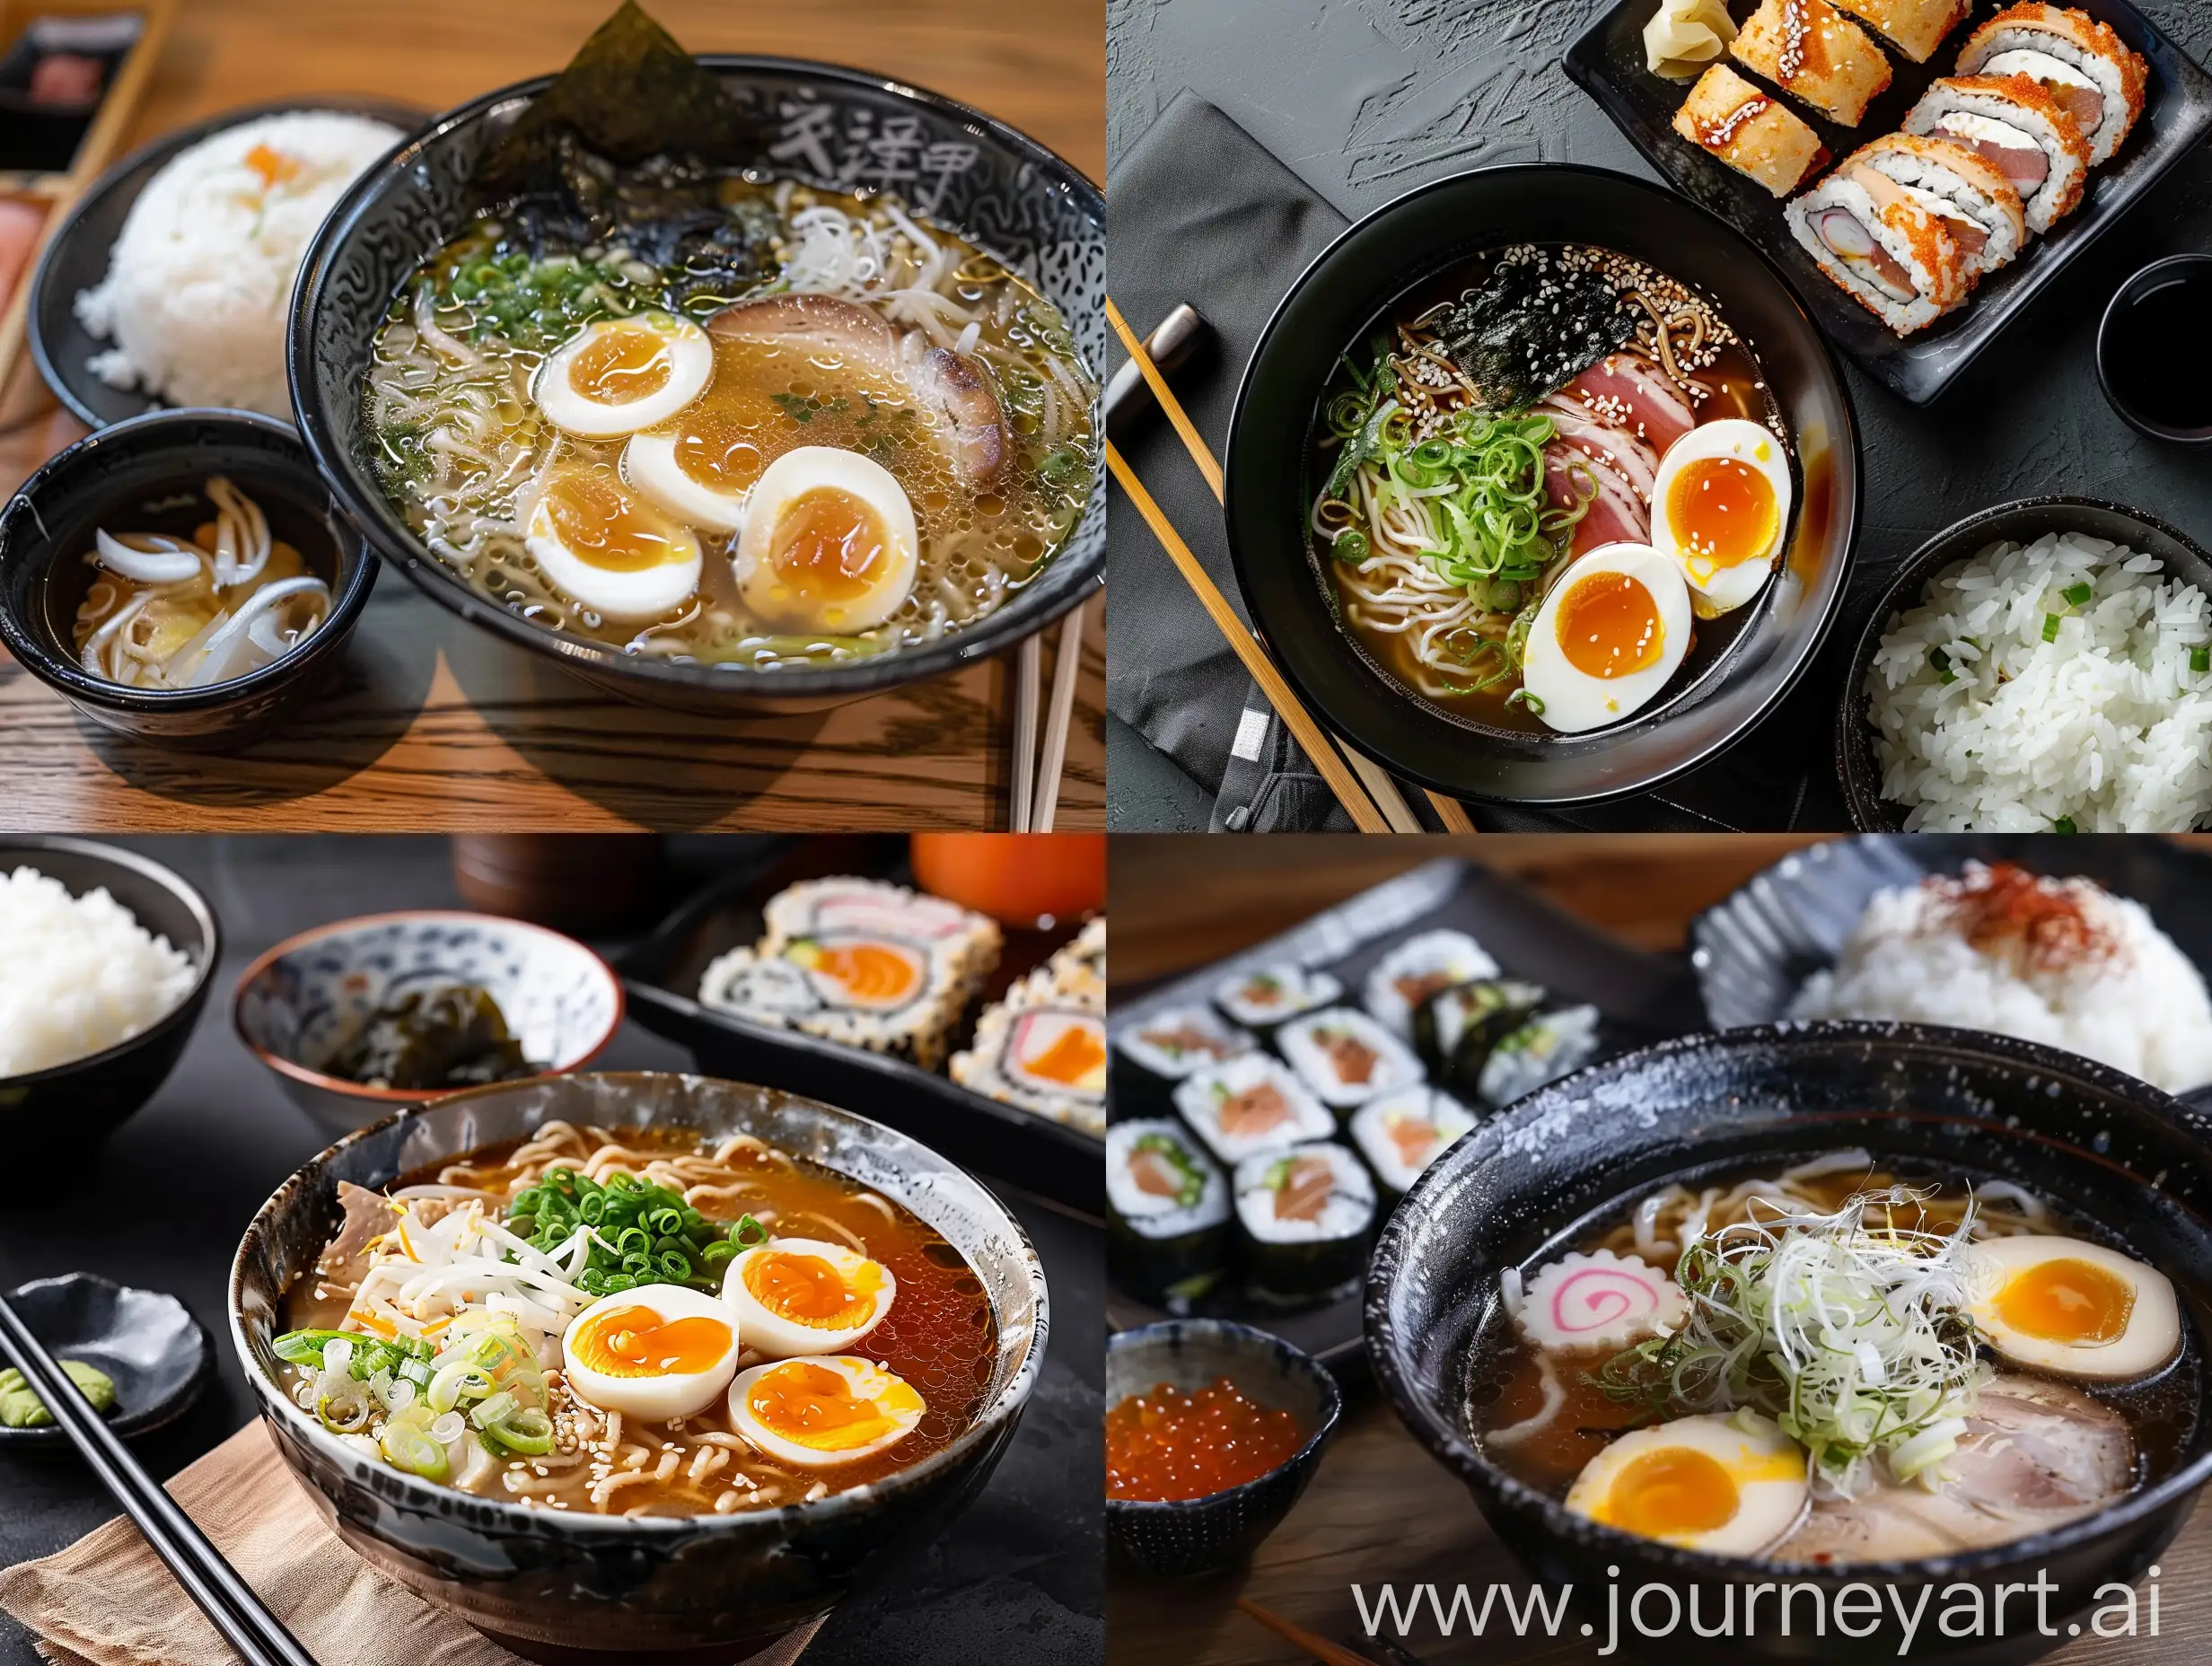 Traditional Japanese food (ramen soup, rice, and sushi)